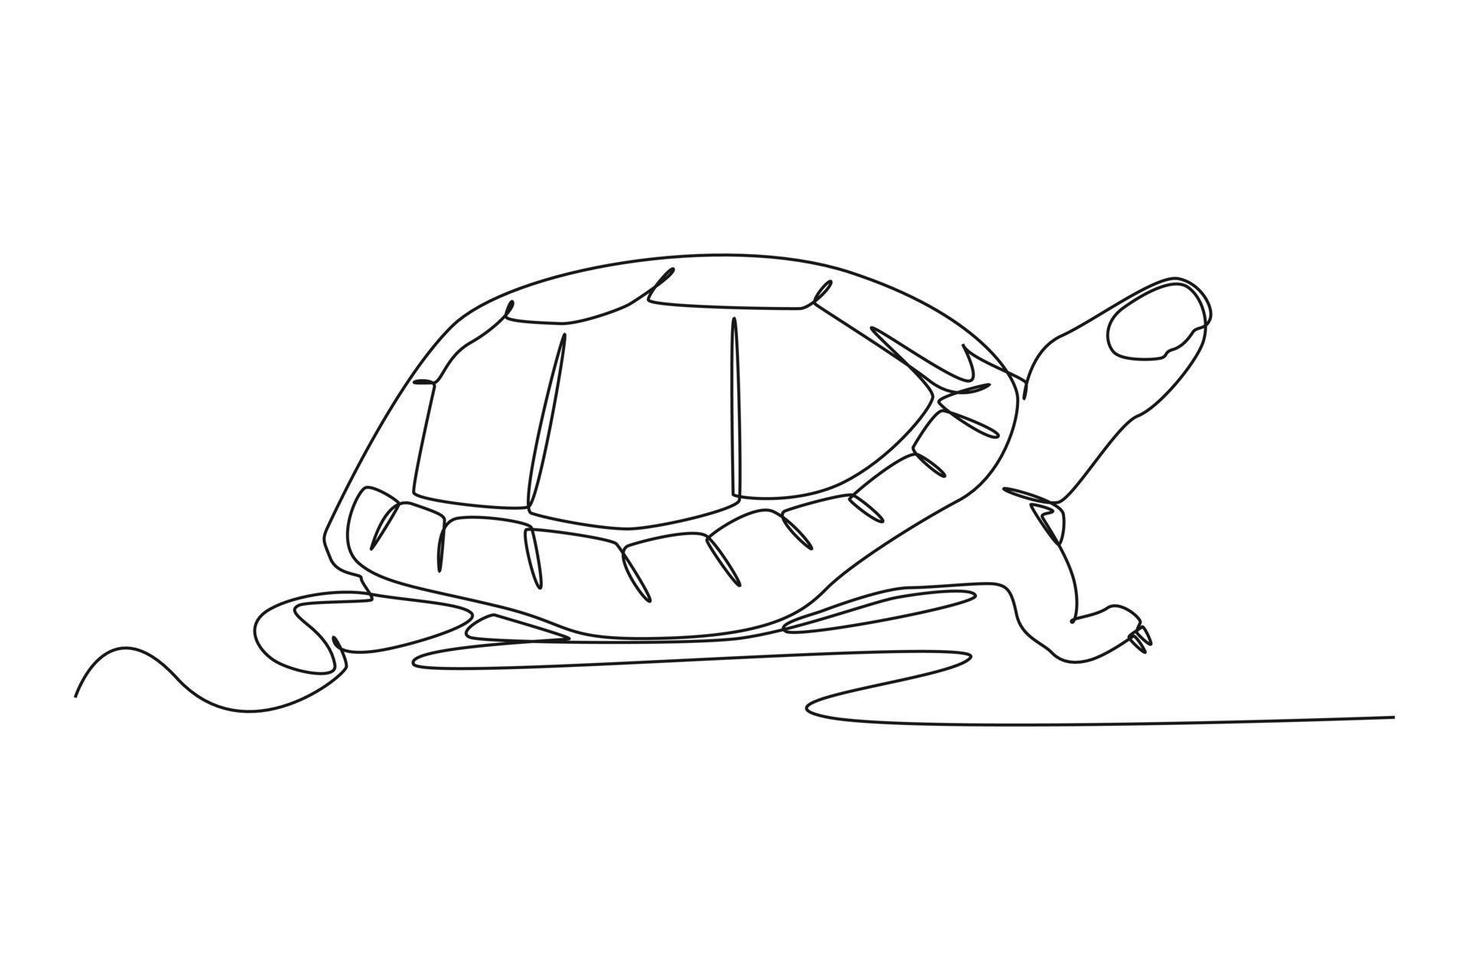 Continuous one-line drawing a turtle was crawling on the ground. Animals concept single line draw design graphic vector illustration